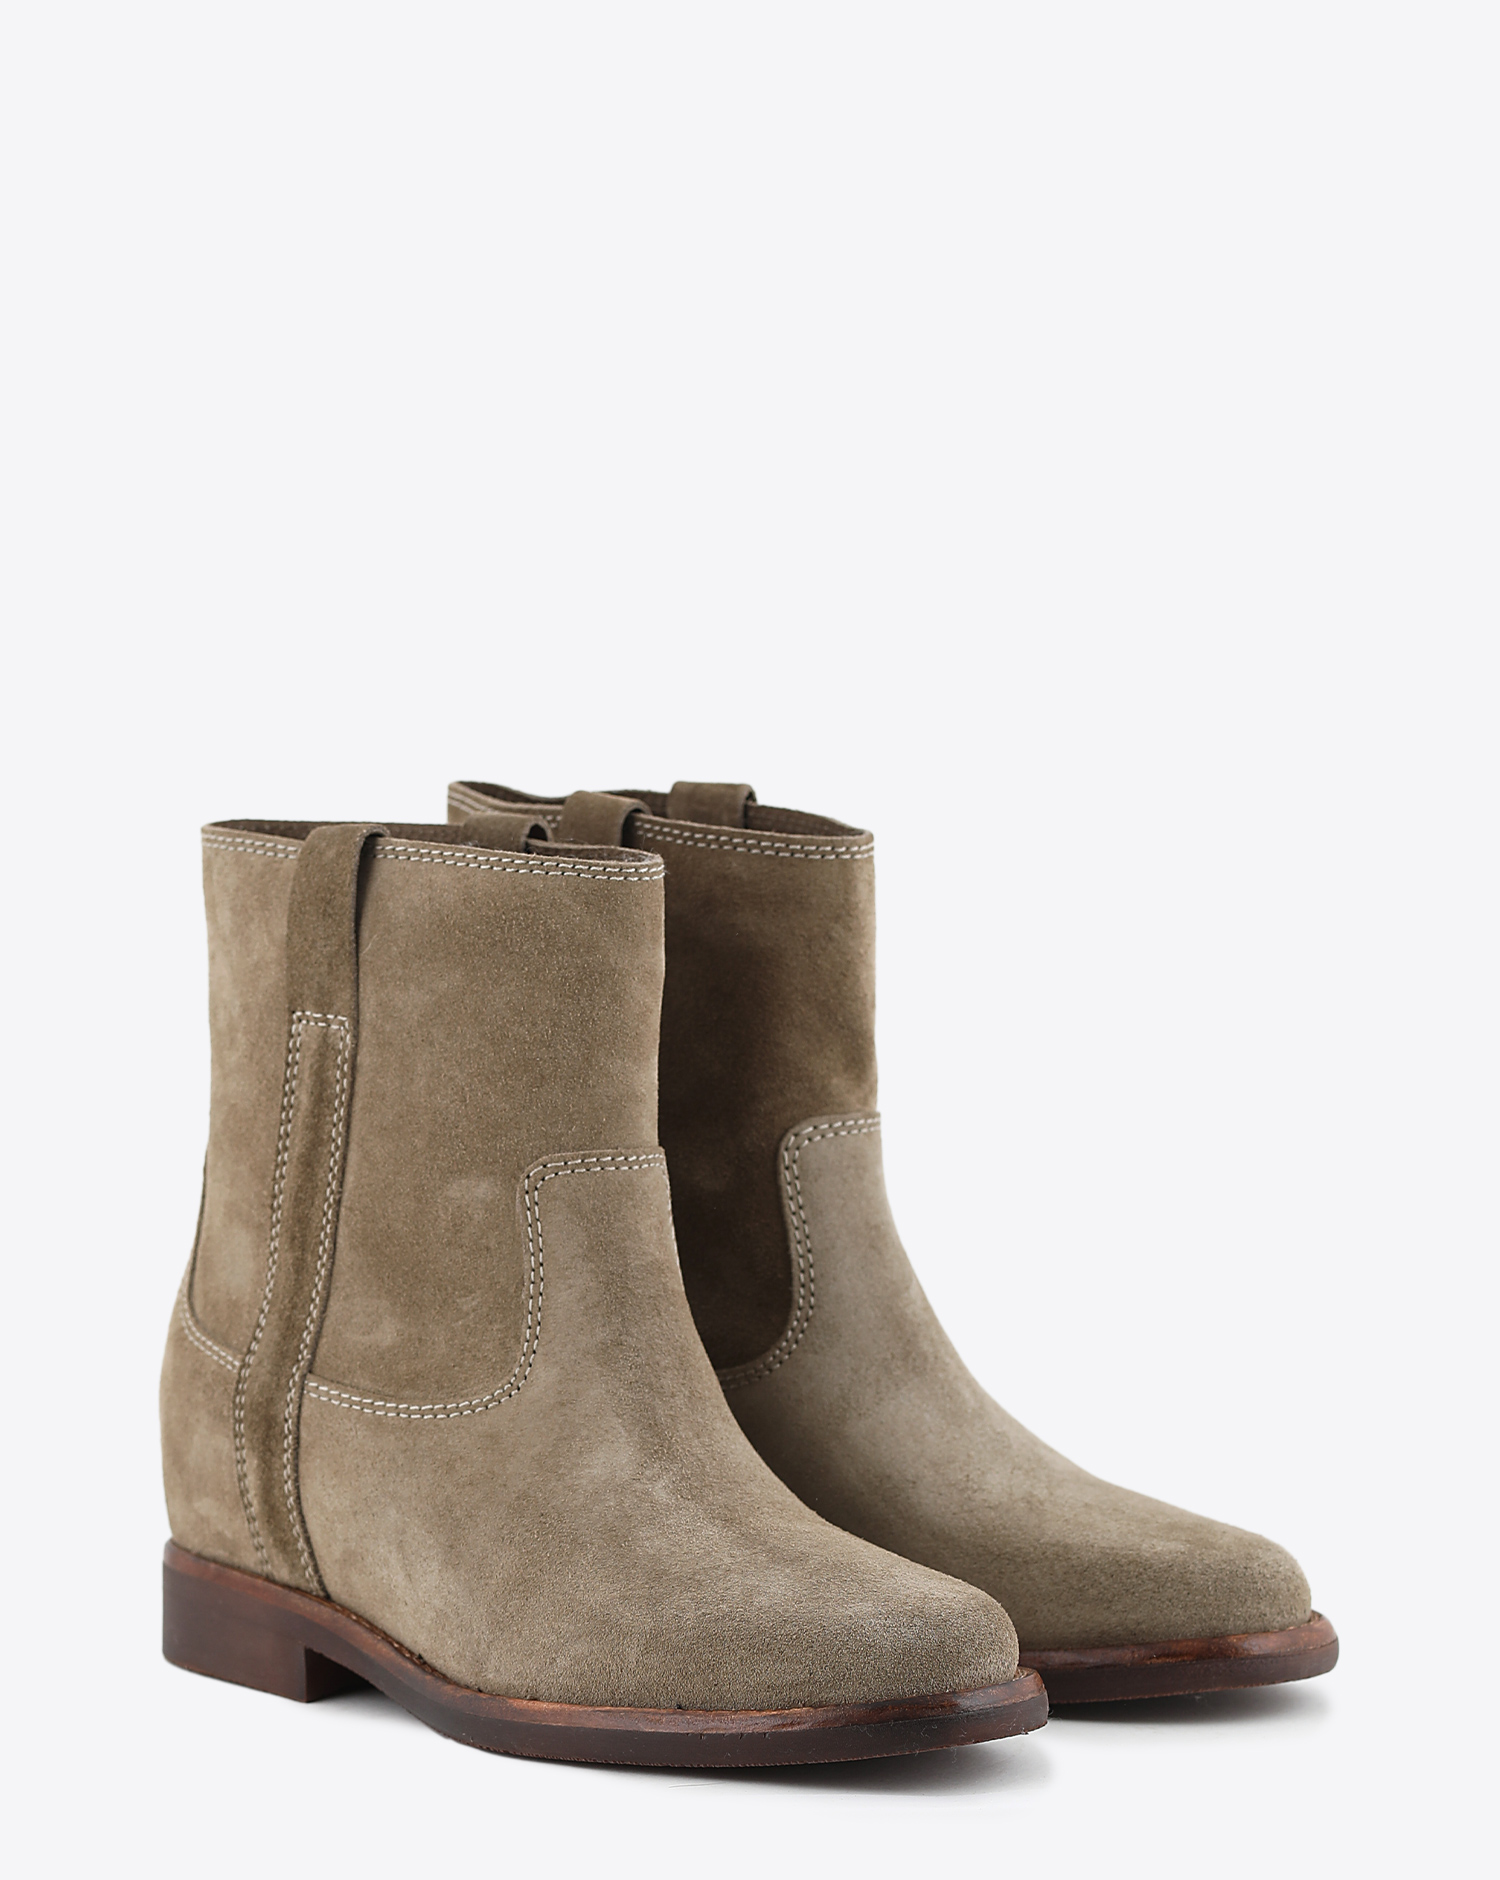 Boots Susee Isabel Marant Étoile Taupe